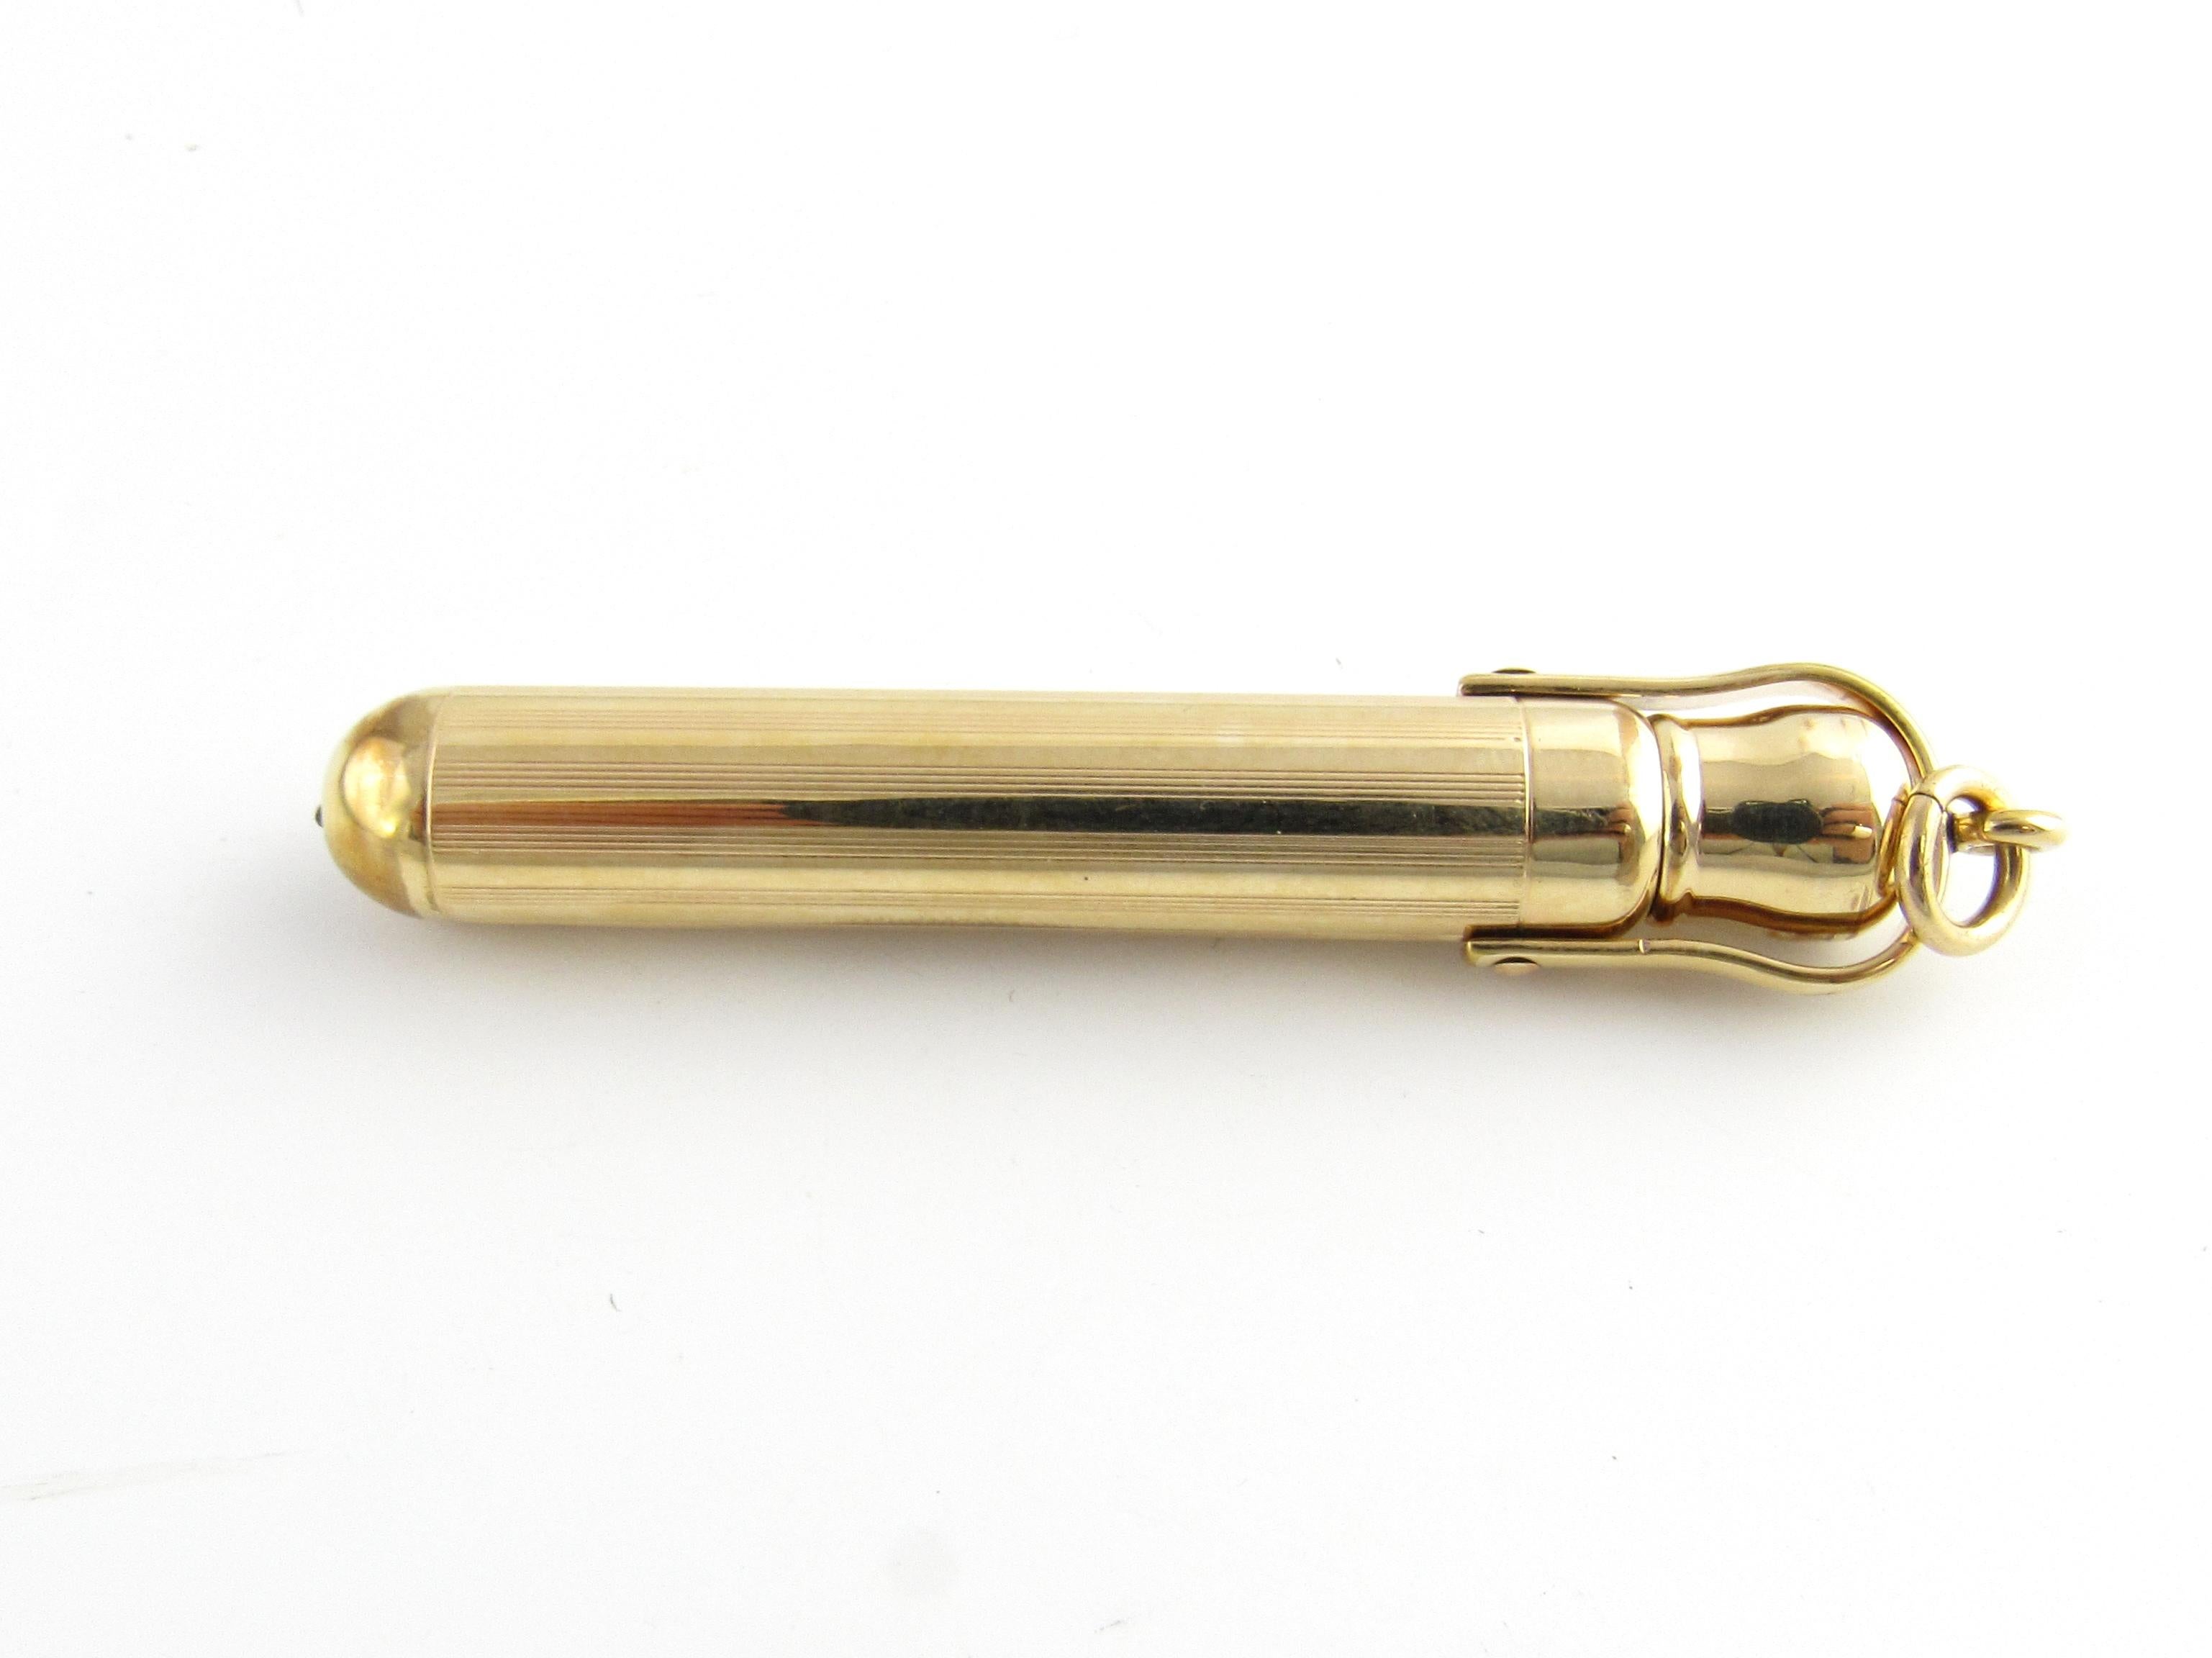 10 Karat Yellow Gold Telescopic Pencil-

This elegant piece features a telescopic pencil that opens to 110 mm. Case has hanging ring to attach to chain or fob. Slight dent noted on case.

Size: 67 mm x 9 mm 

Weight: 13.8 dwt. / 21.5 gr.

Hallmark: